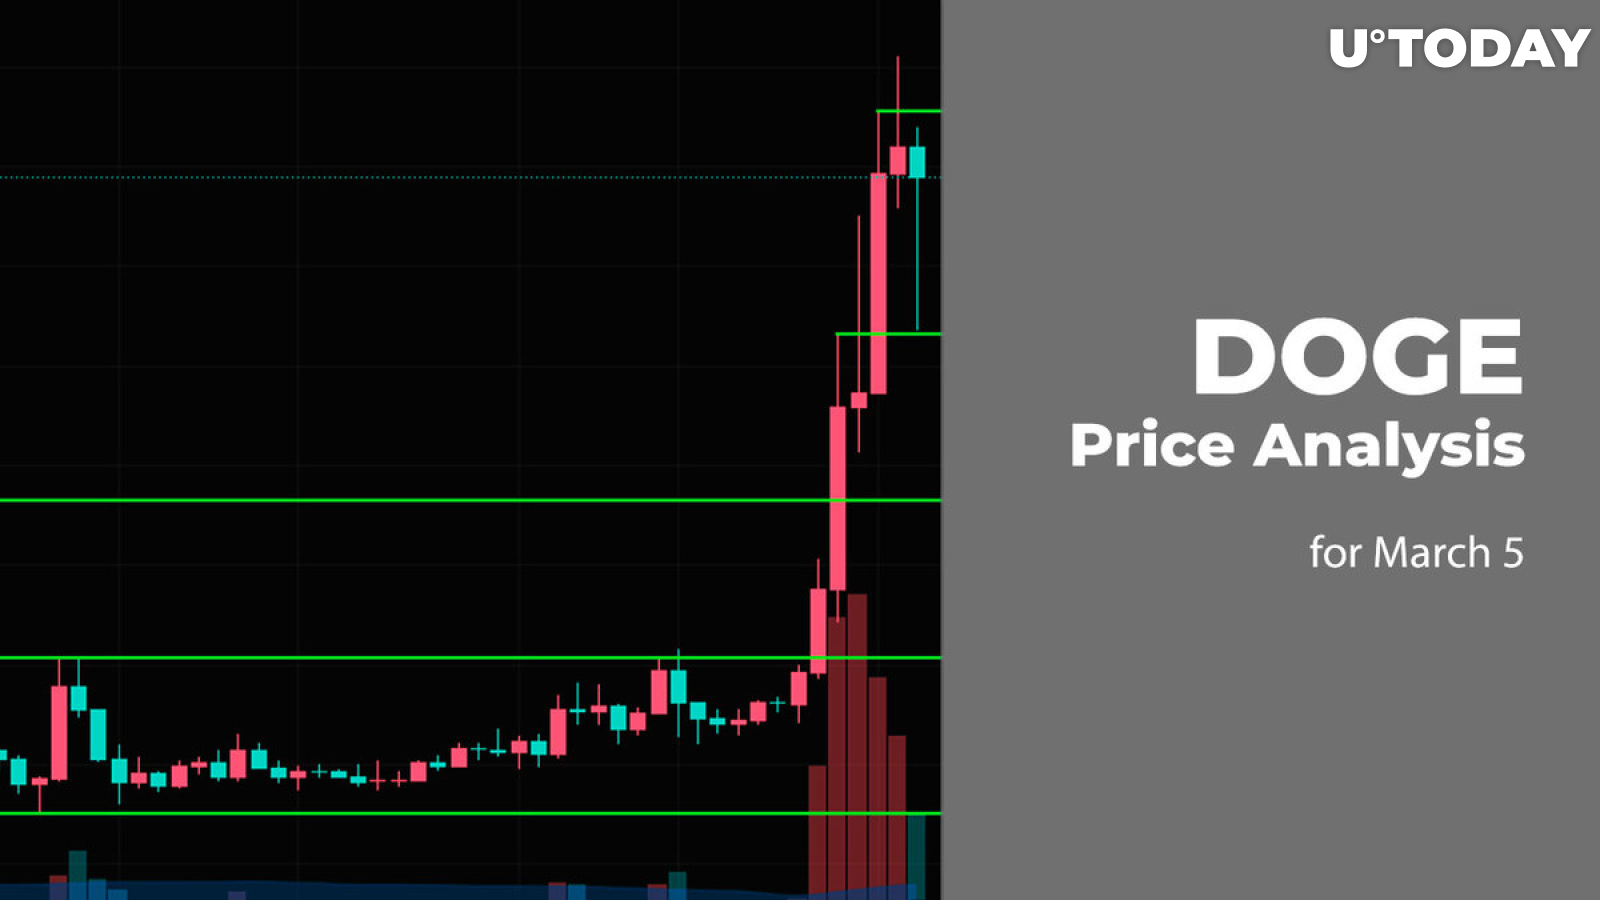 DOGE Price Prediction for March 5